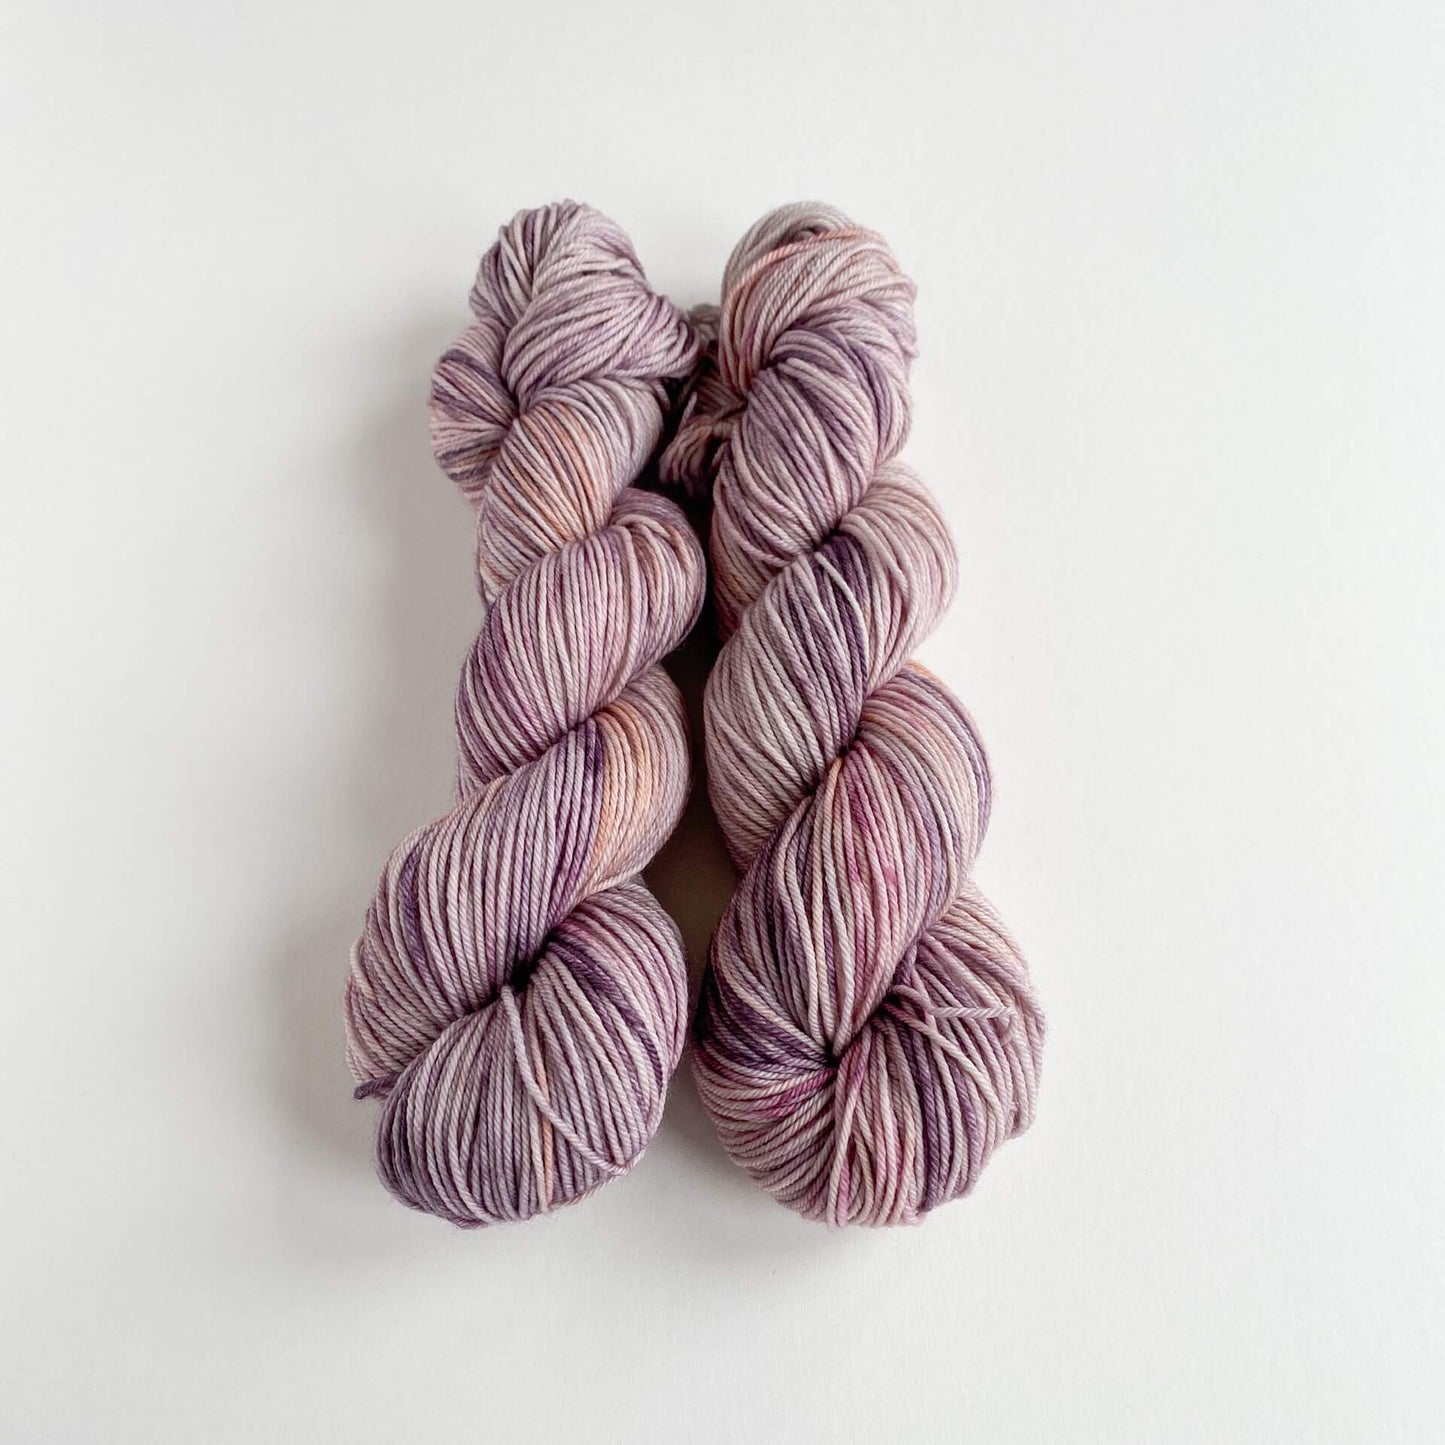 Two skeins of yarn lie wound up on a white background. They are coloured with pink and purple dyes.